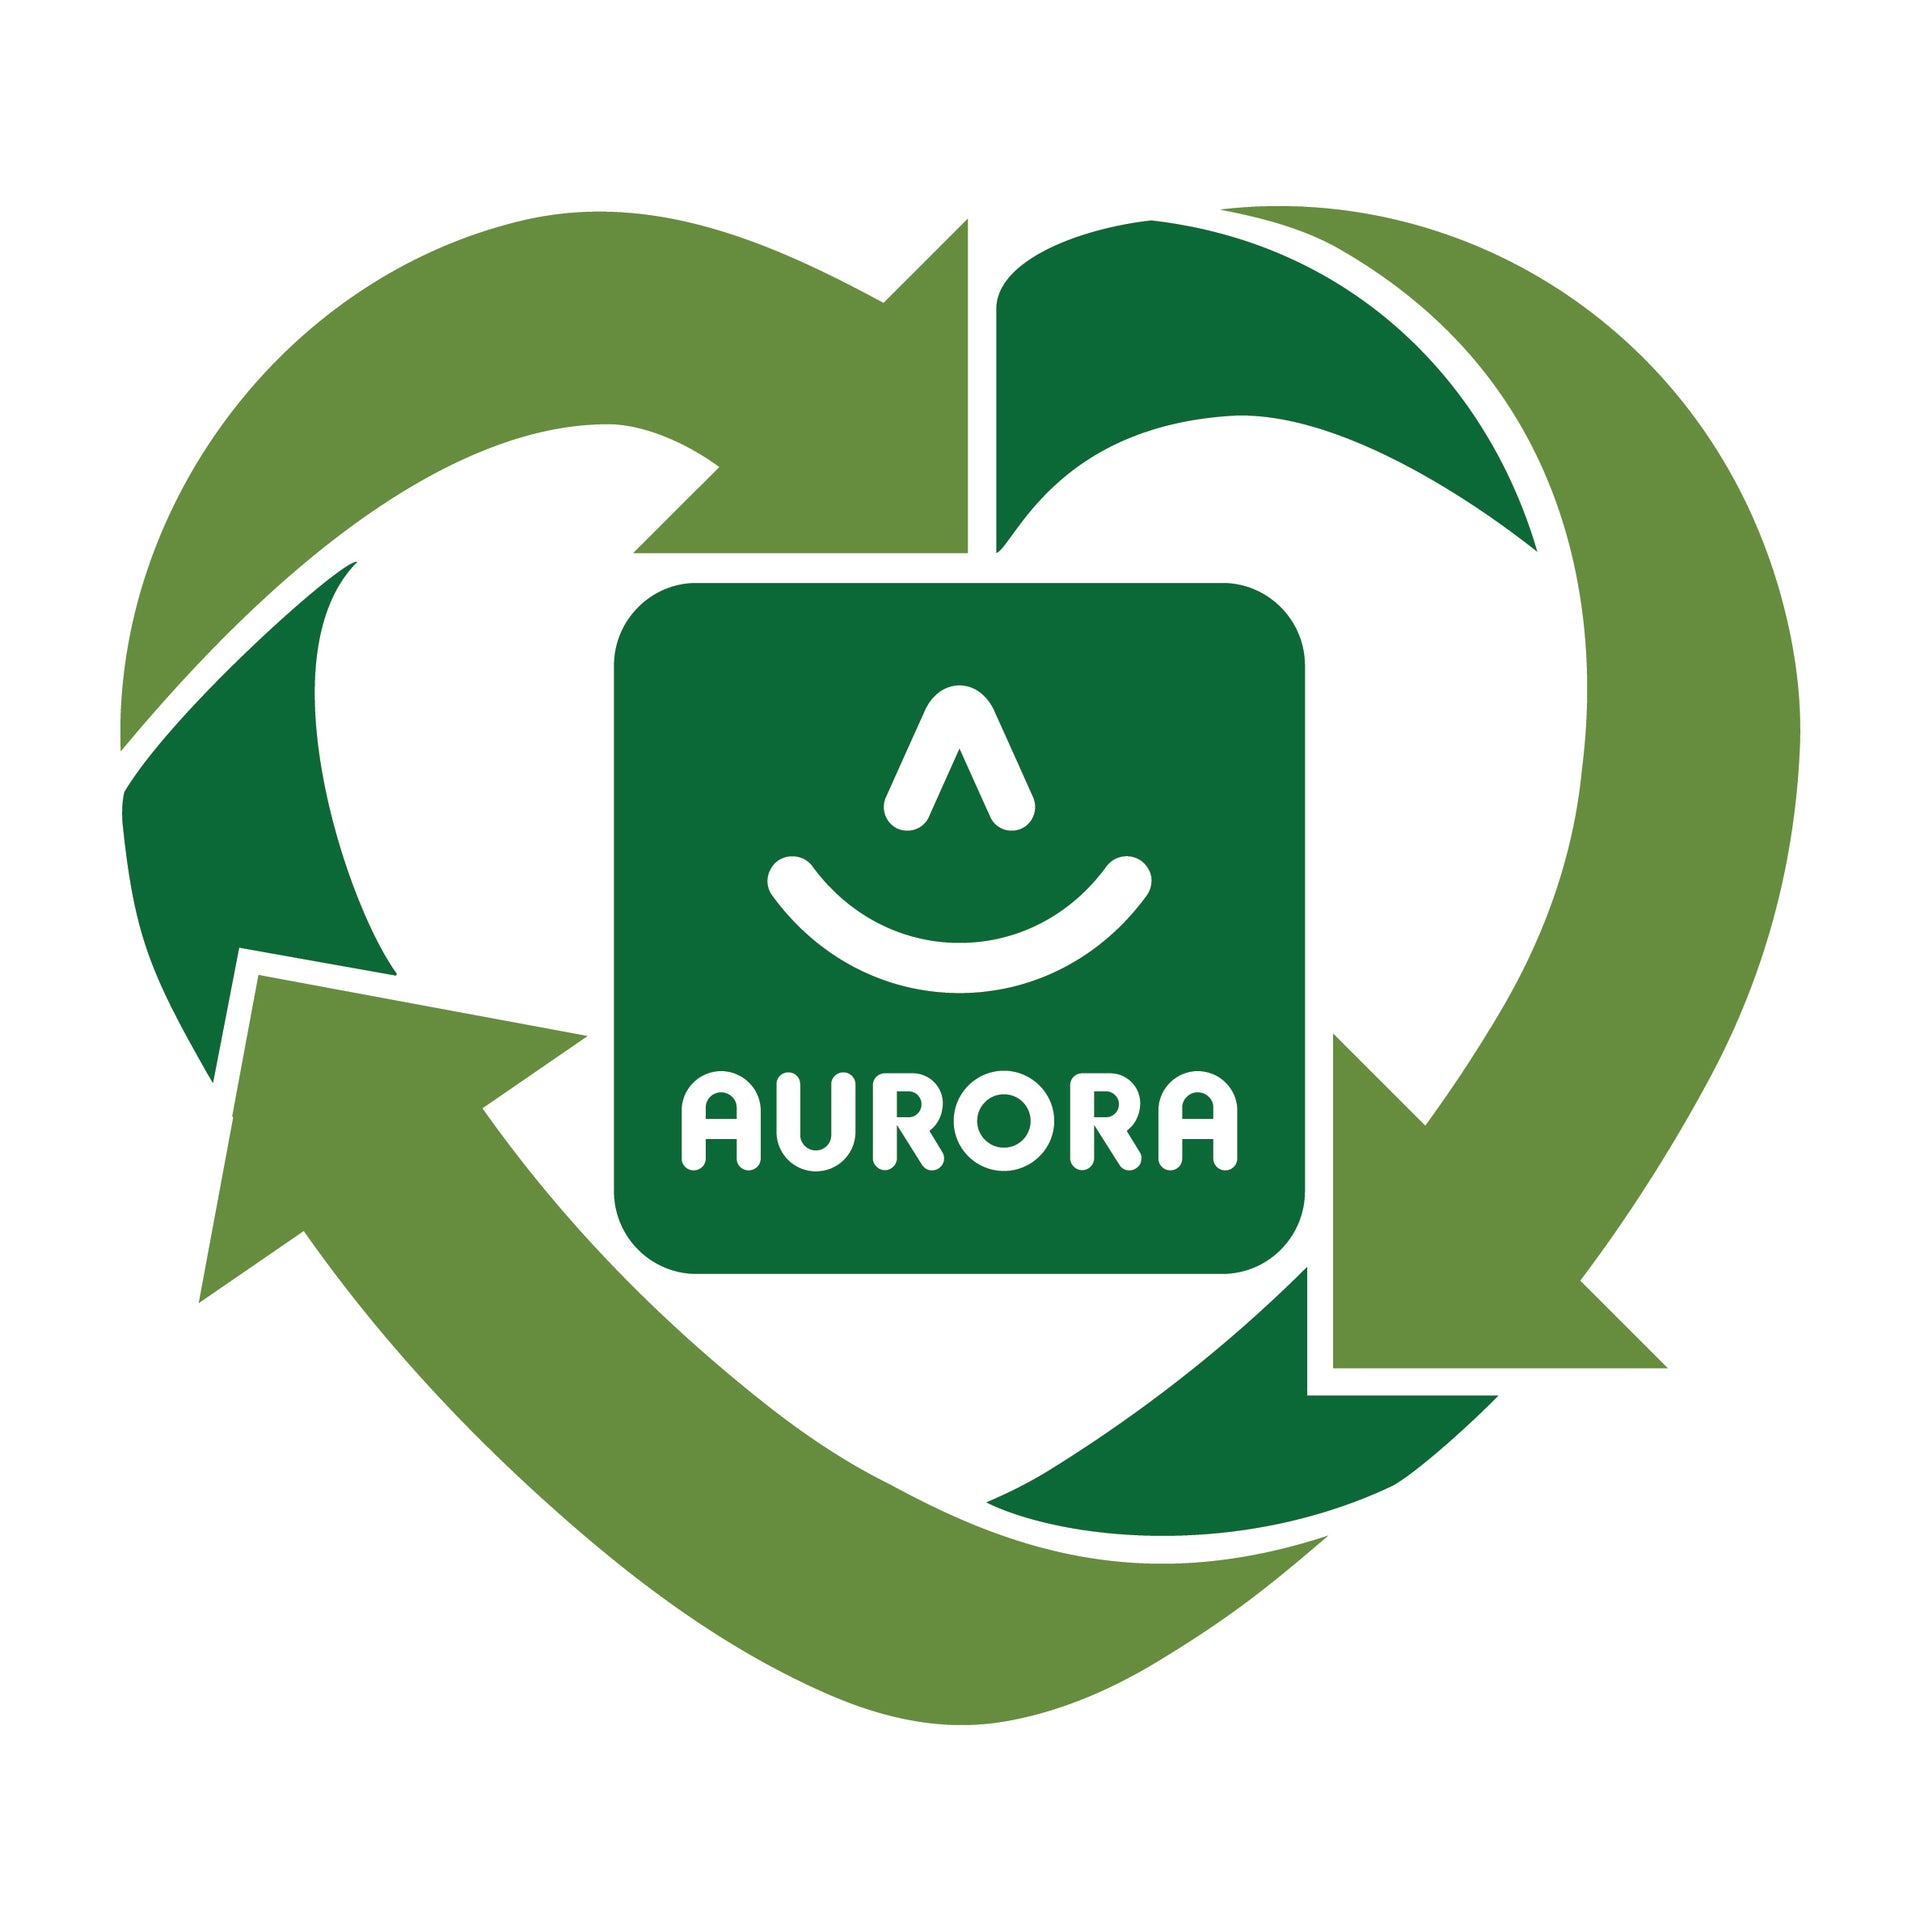 Aurora stuffed animal plush logo with a green heart for eco friendly toys and sustainable toys